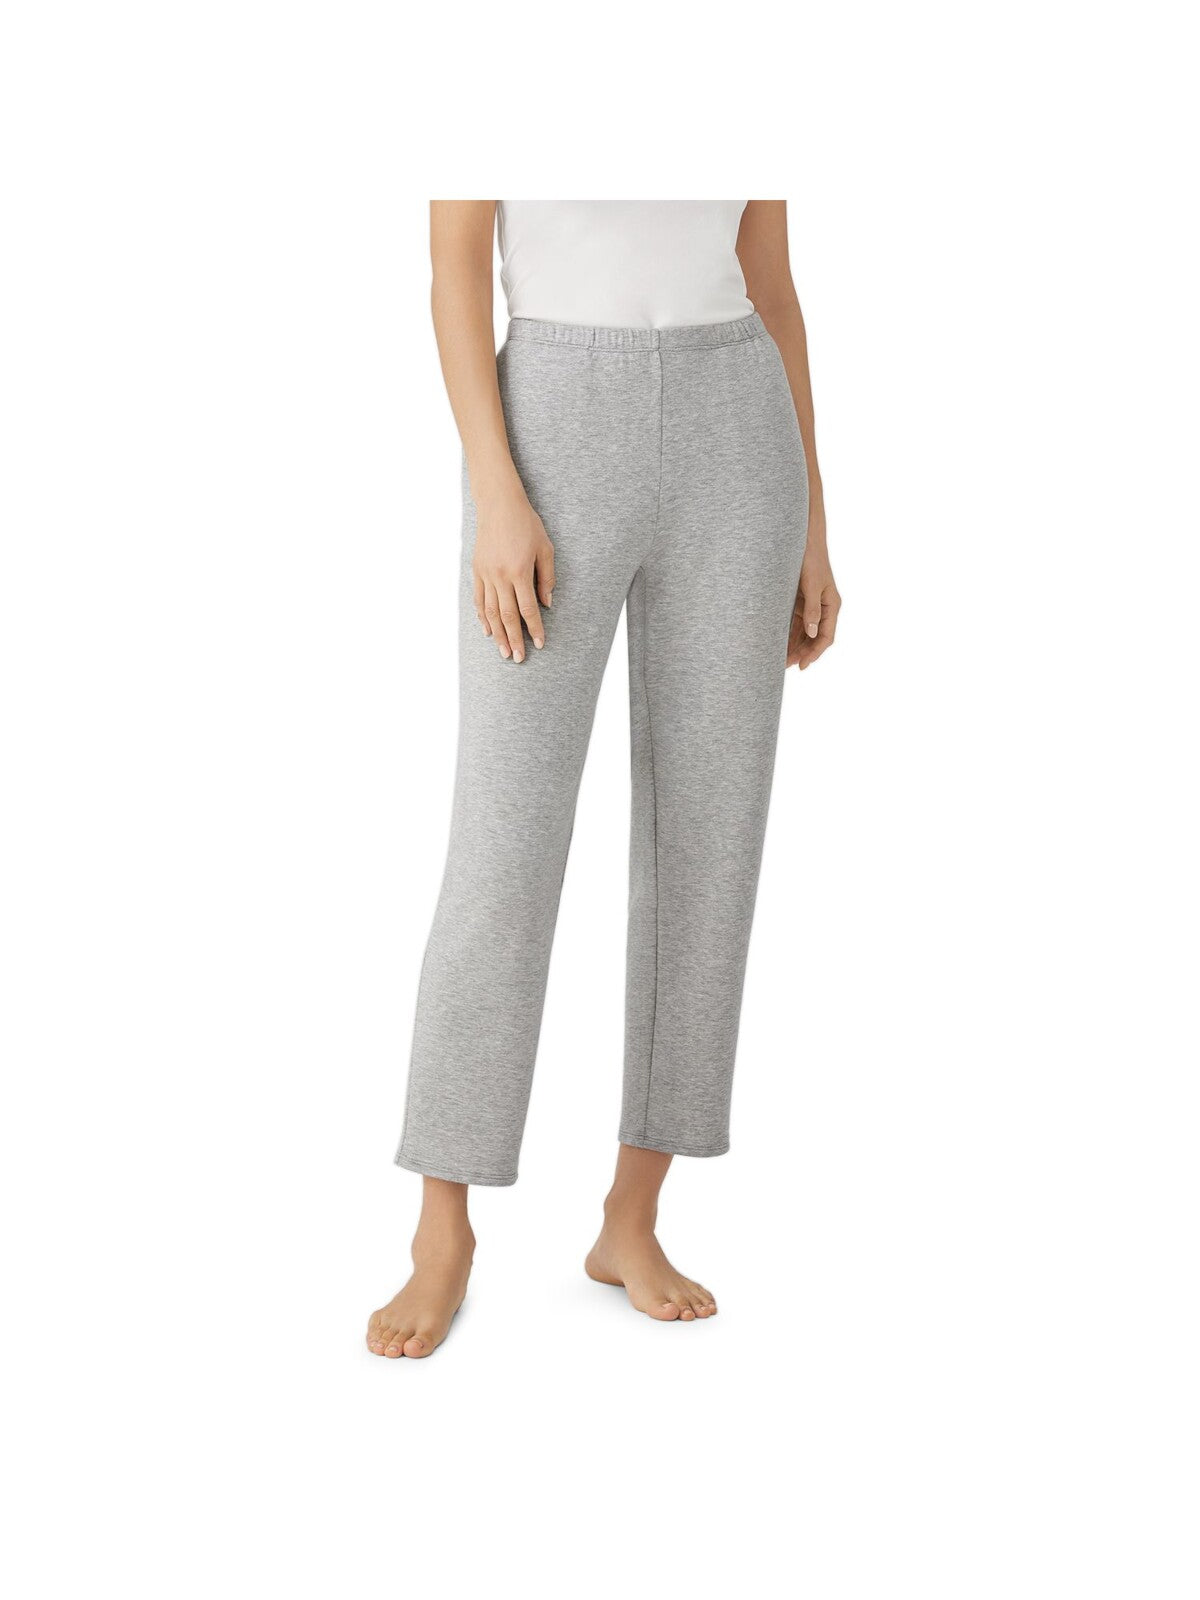 EILEEN FISHER Womens Gray Stretch Heather Pants XS